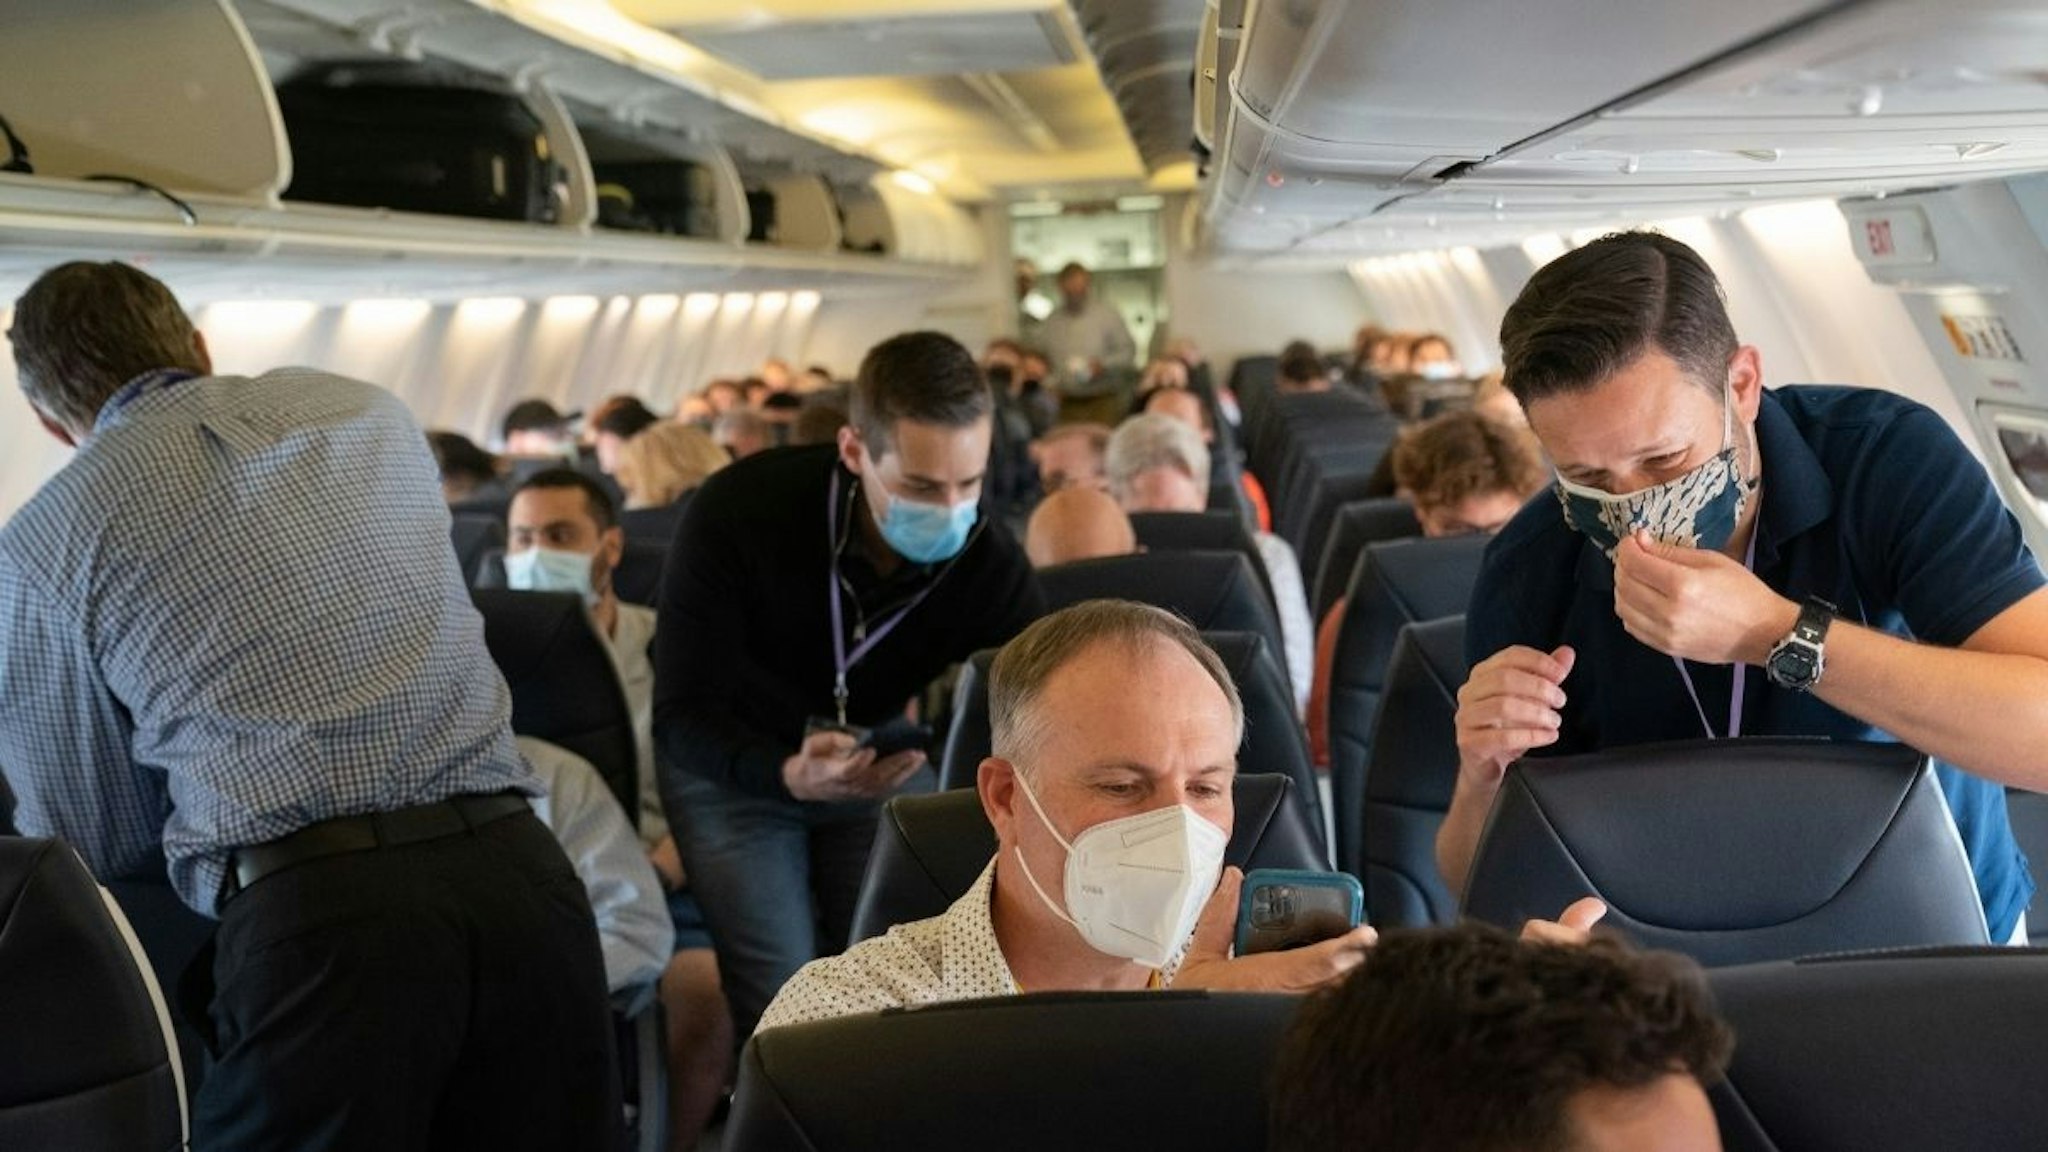 Passengers wearing protective masks onboard a Boeing Co. 737-800 operated by Avelo Airlines ahead of the airline's inaugural flight at Hollywood Burbank Airport (BUR) in Burbank, California, U.S., on Wednesday, April 28, 2021.